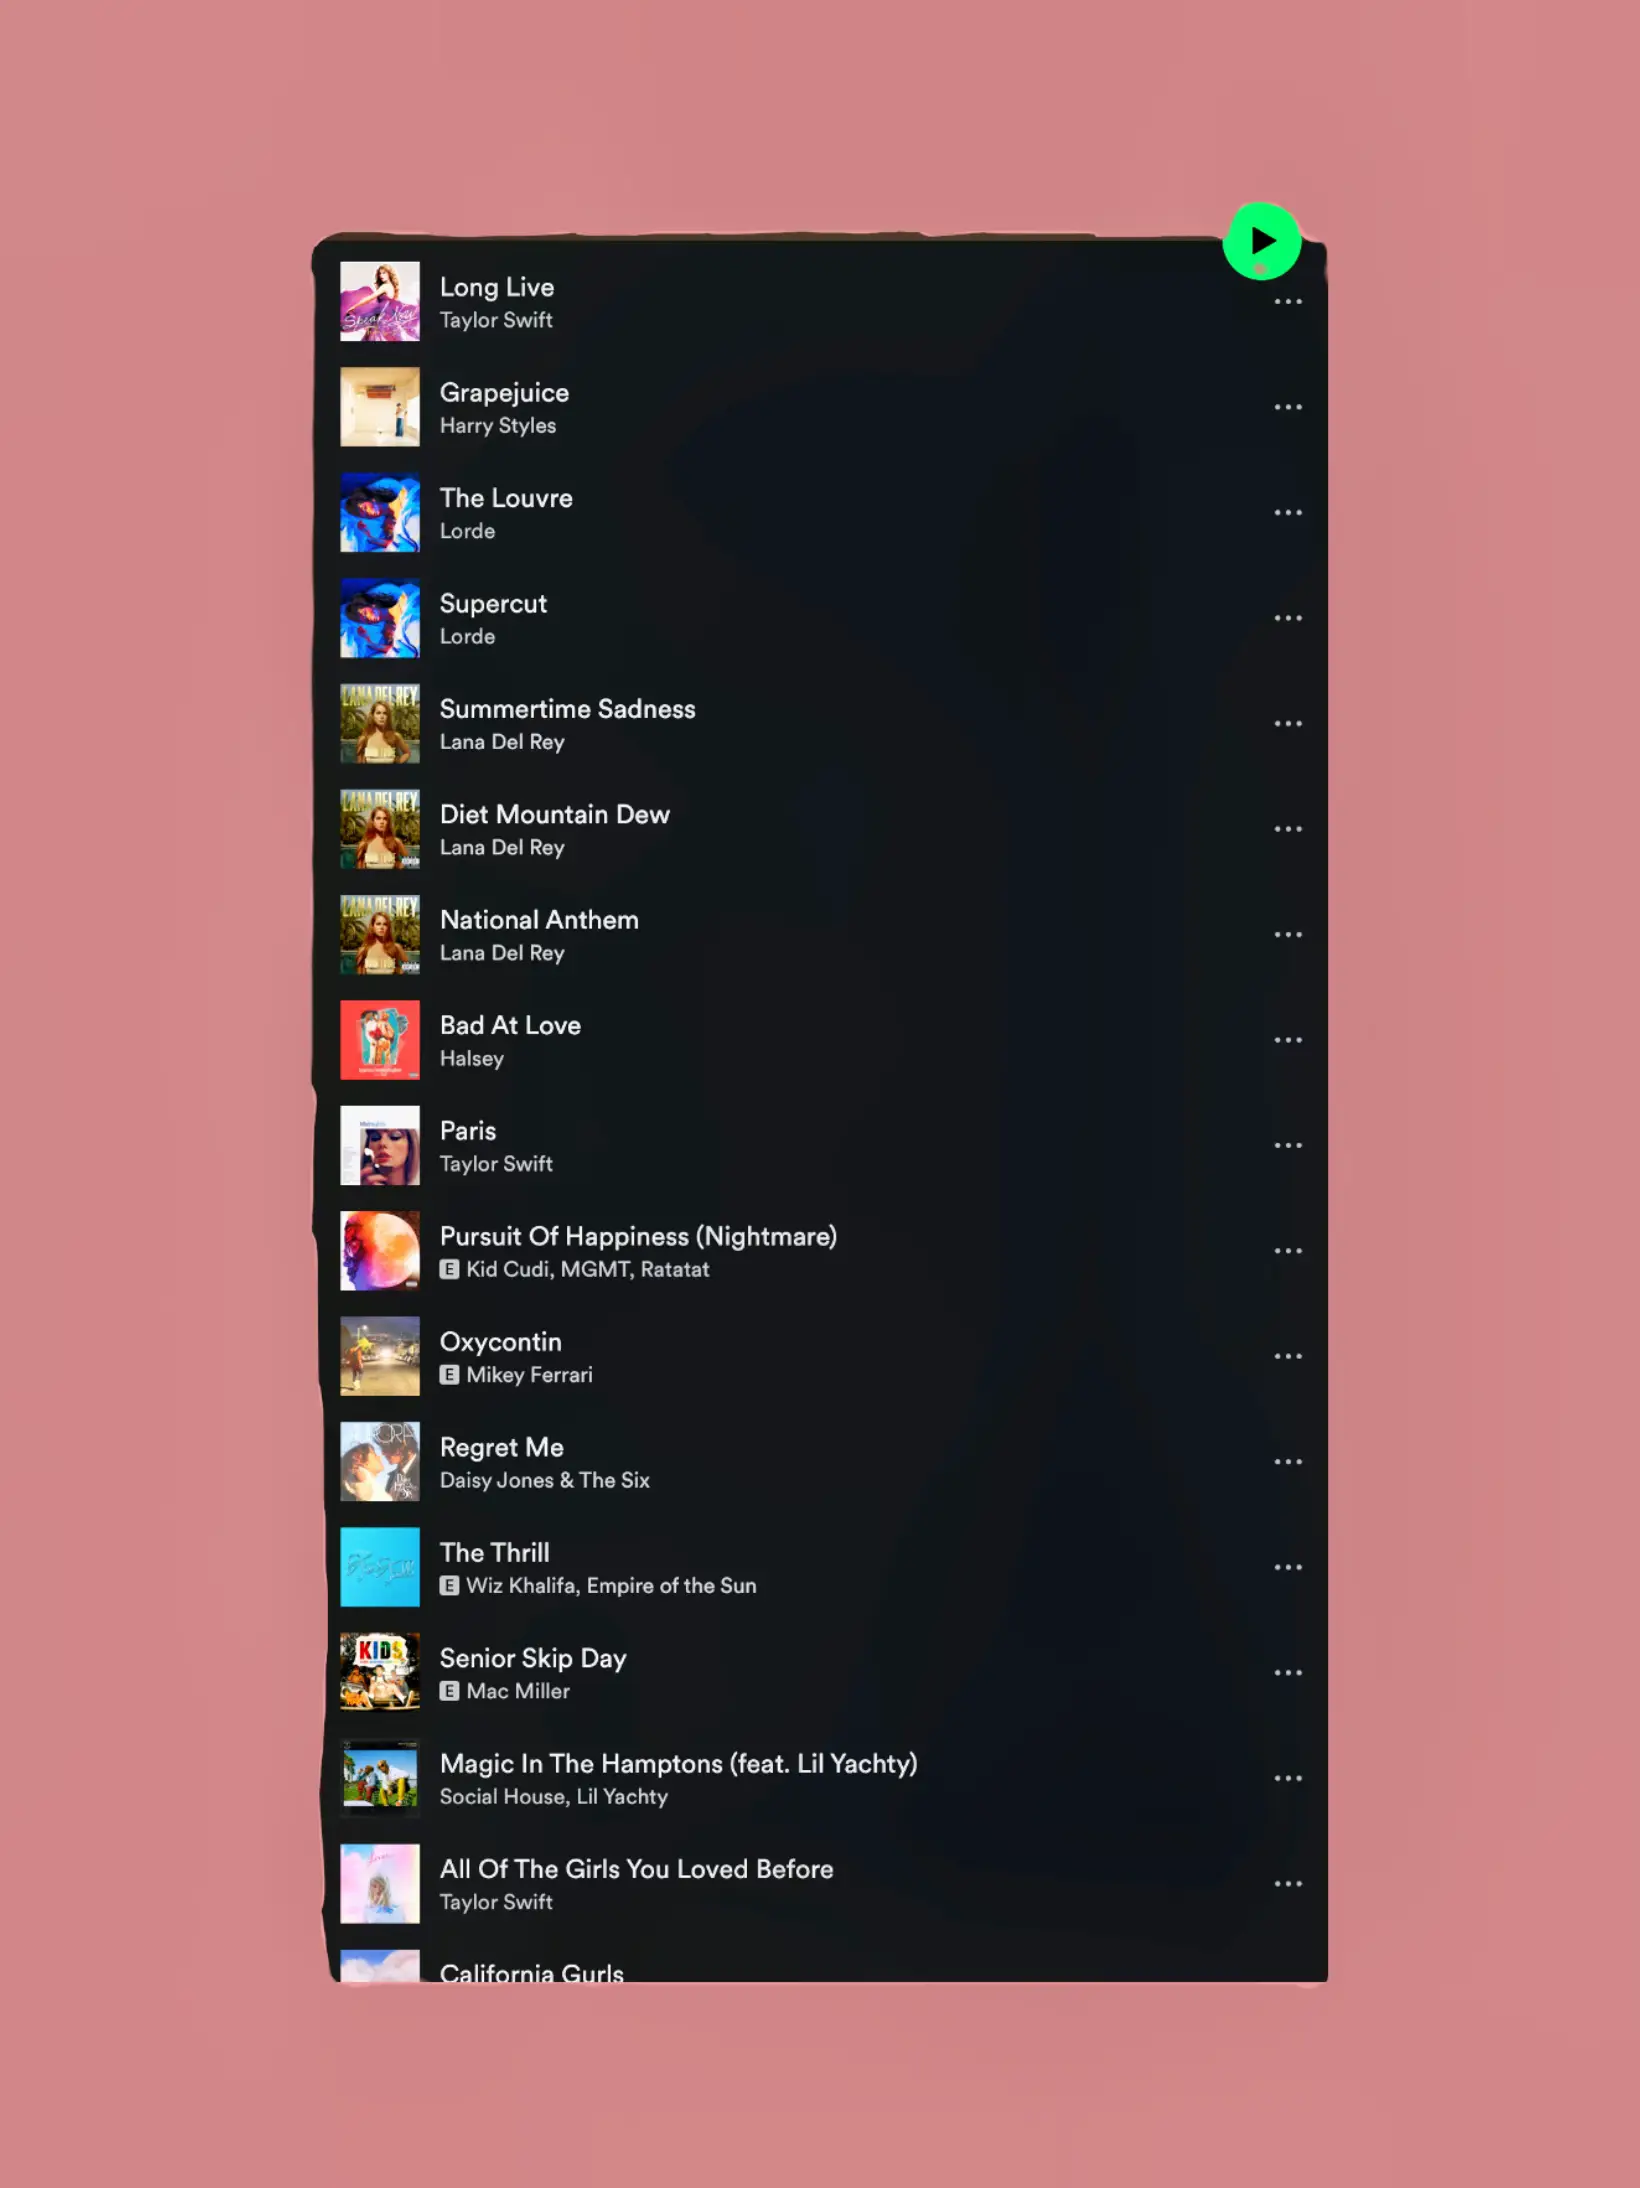  A list of songs with a pink background.